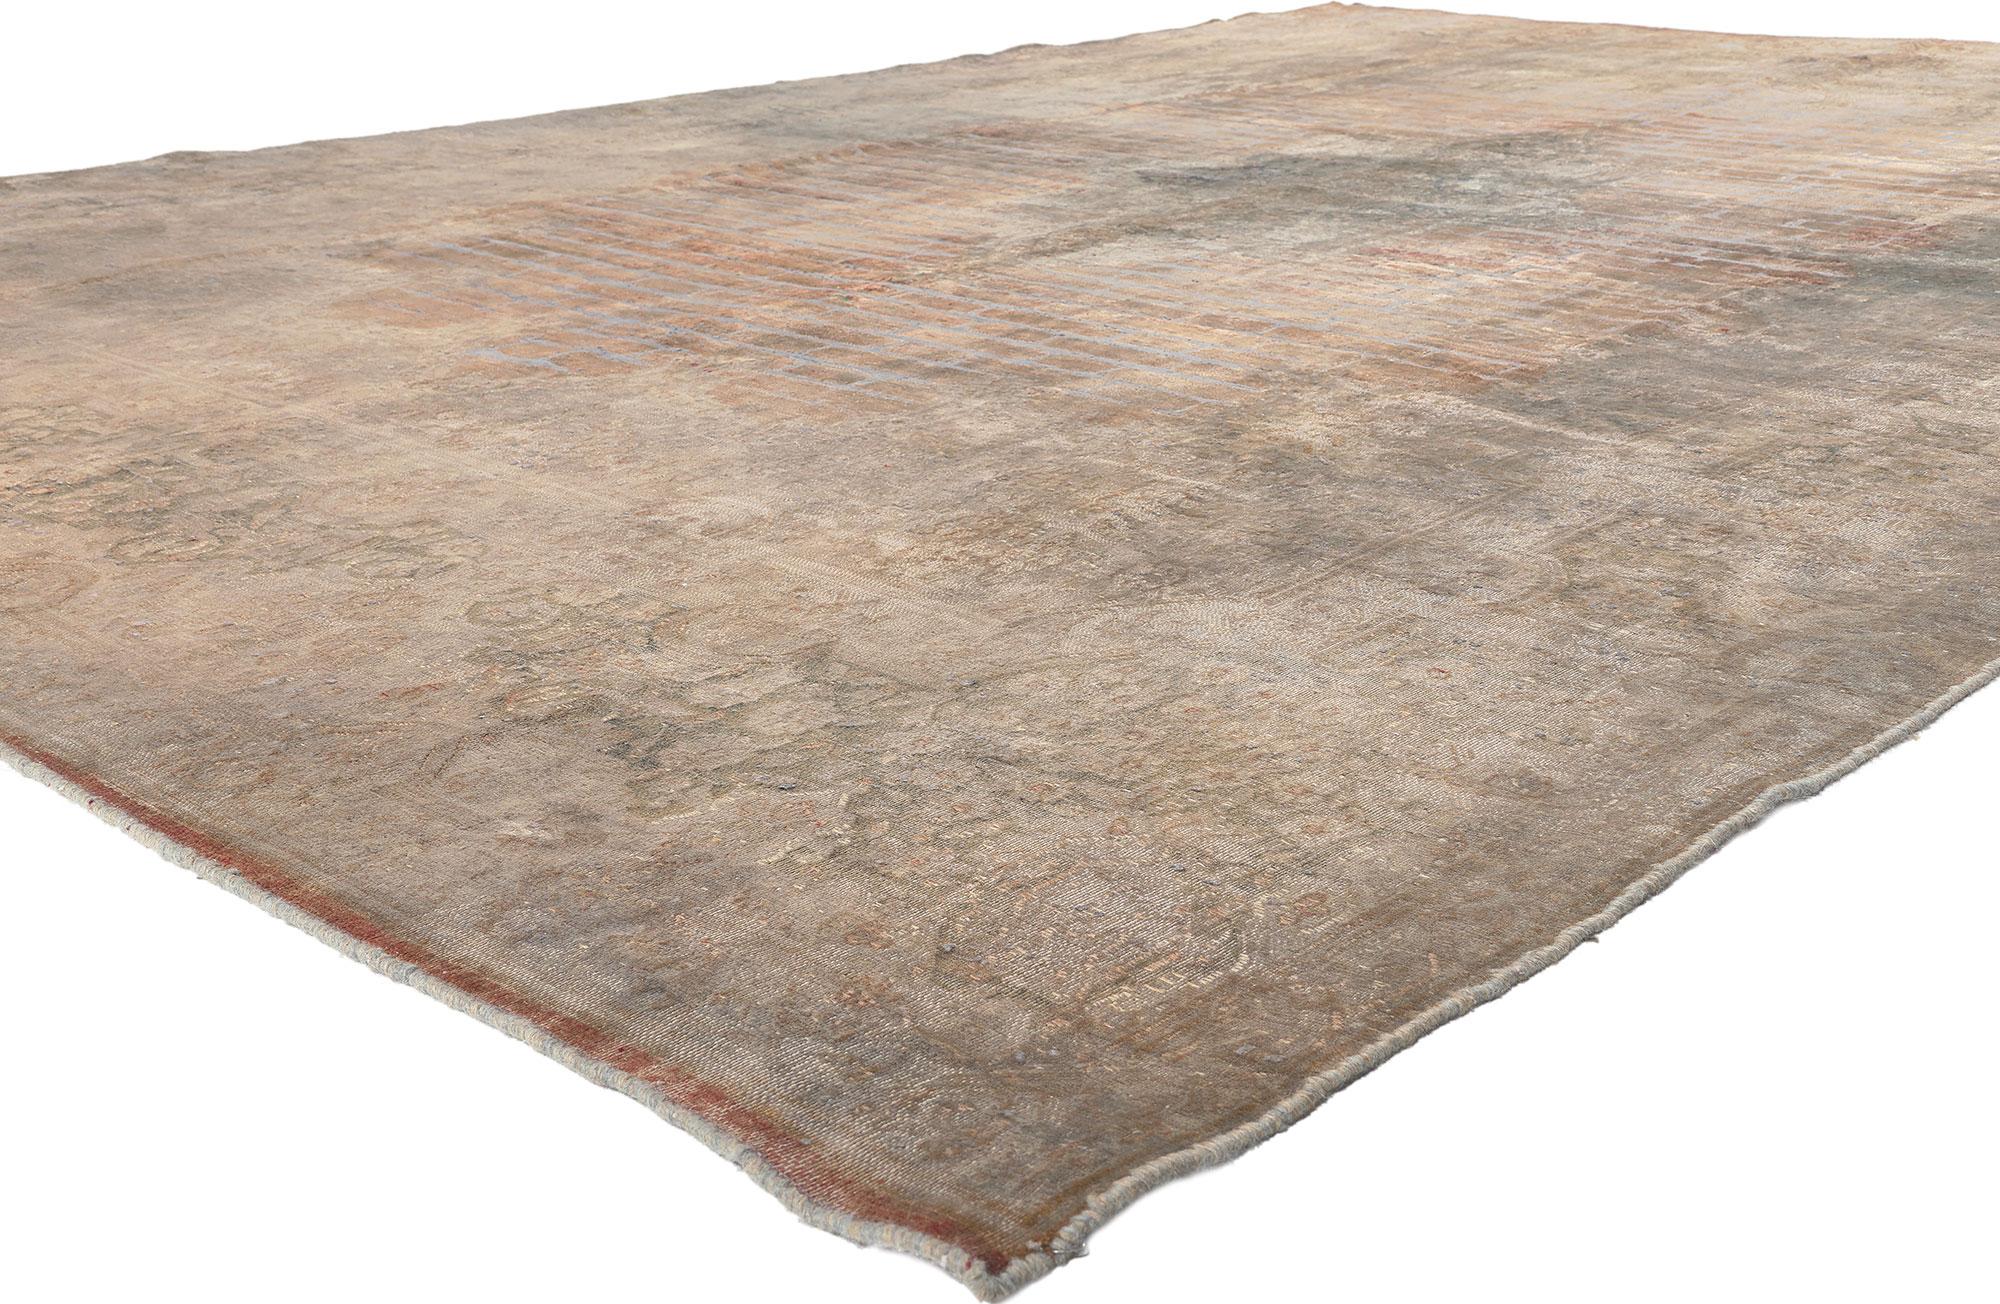 60621 Vintage Turkish Overdyed Rug, 09'09 x 14'03.
In the realm of design, the warm Industrial style gracefully intertwines with earth-tone elegance within the folds of this hand knotted wool vintage Turkish overdyed rug. A tapestry of nostalgia